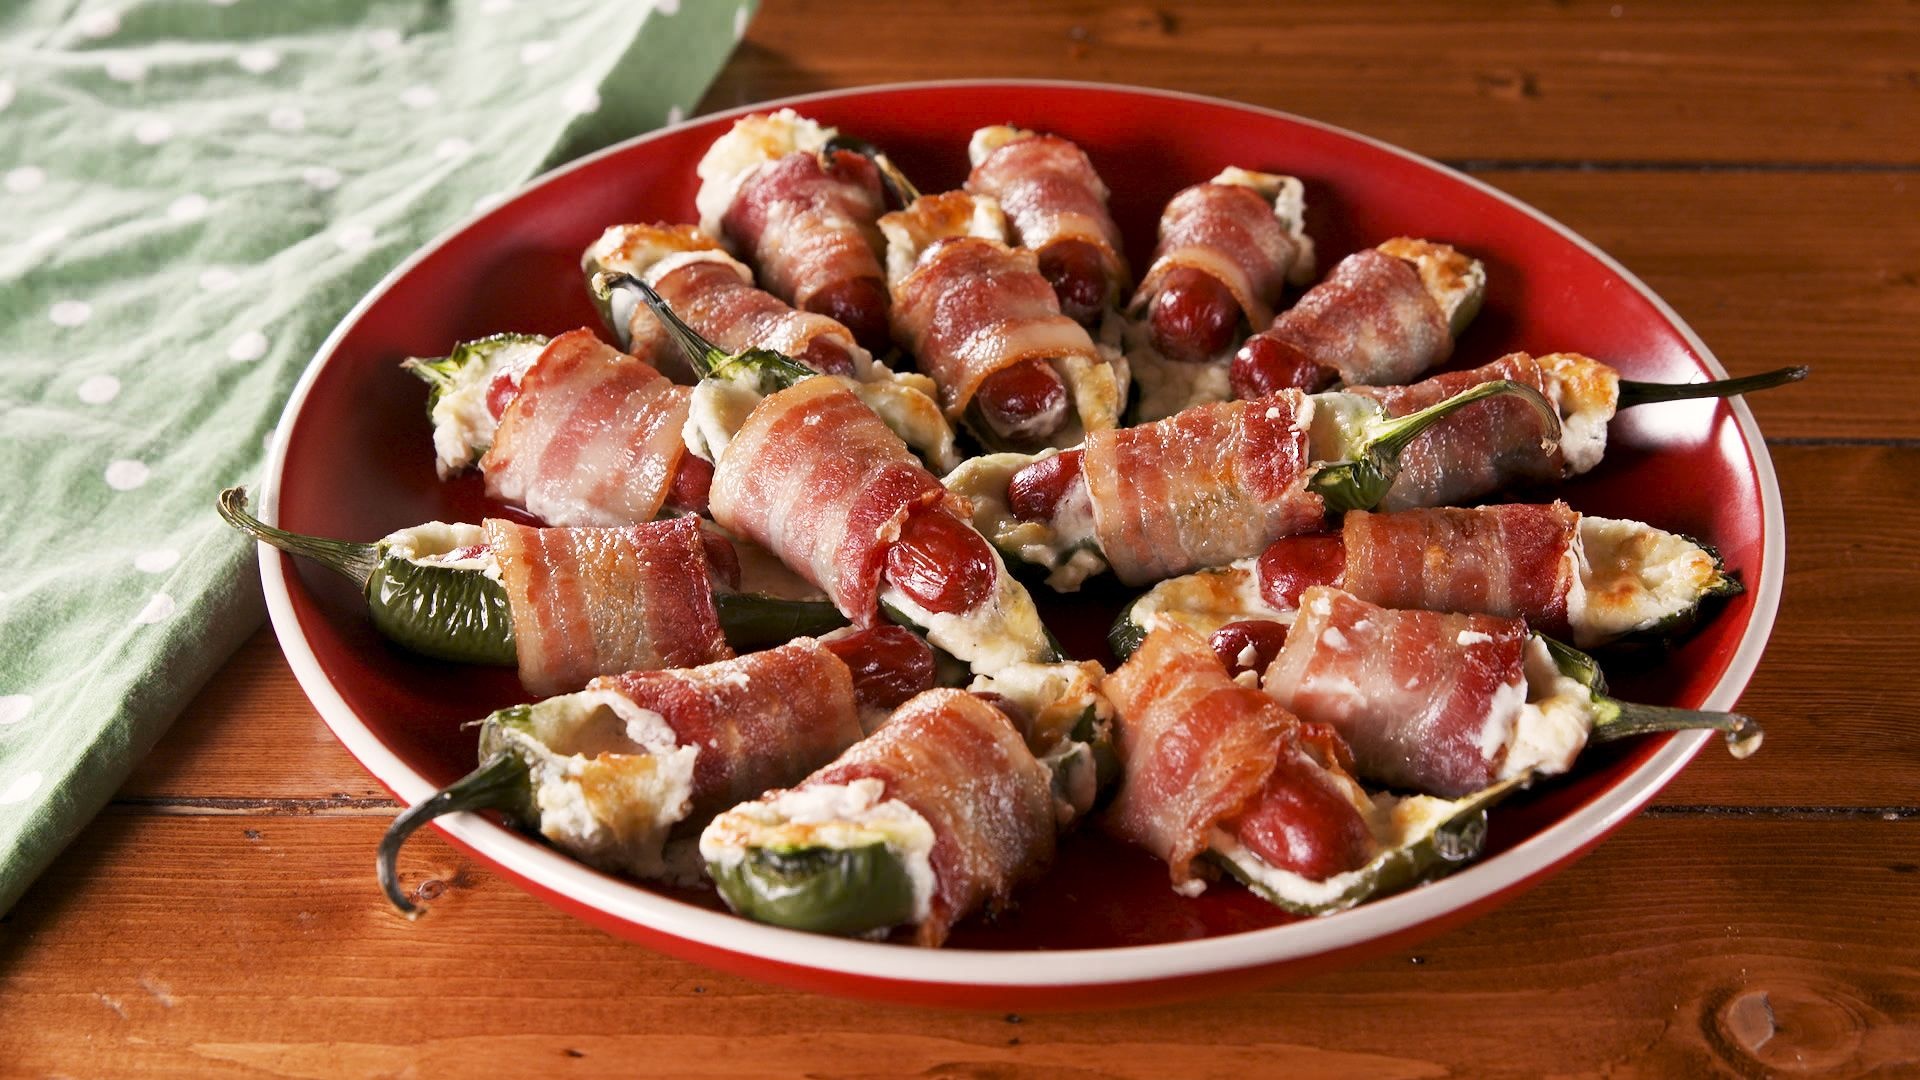 Best pigs in a blanket jalapeo poppers, Spicy twist on classic, Bite-sized indulgence, Flavorful appetizer, 1920x1080 Full HD Desktop